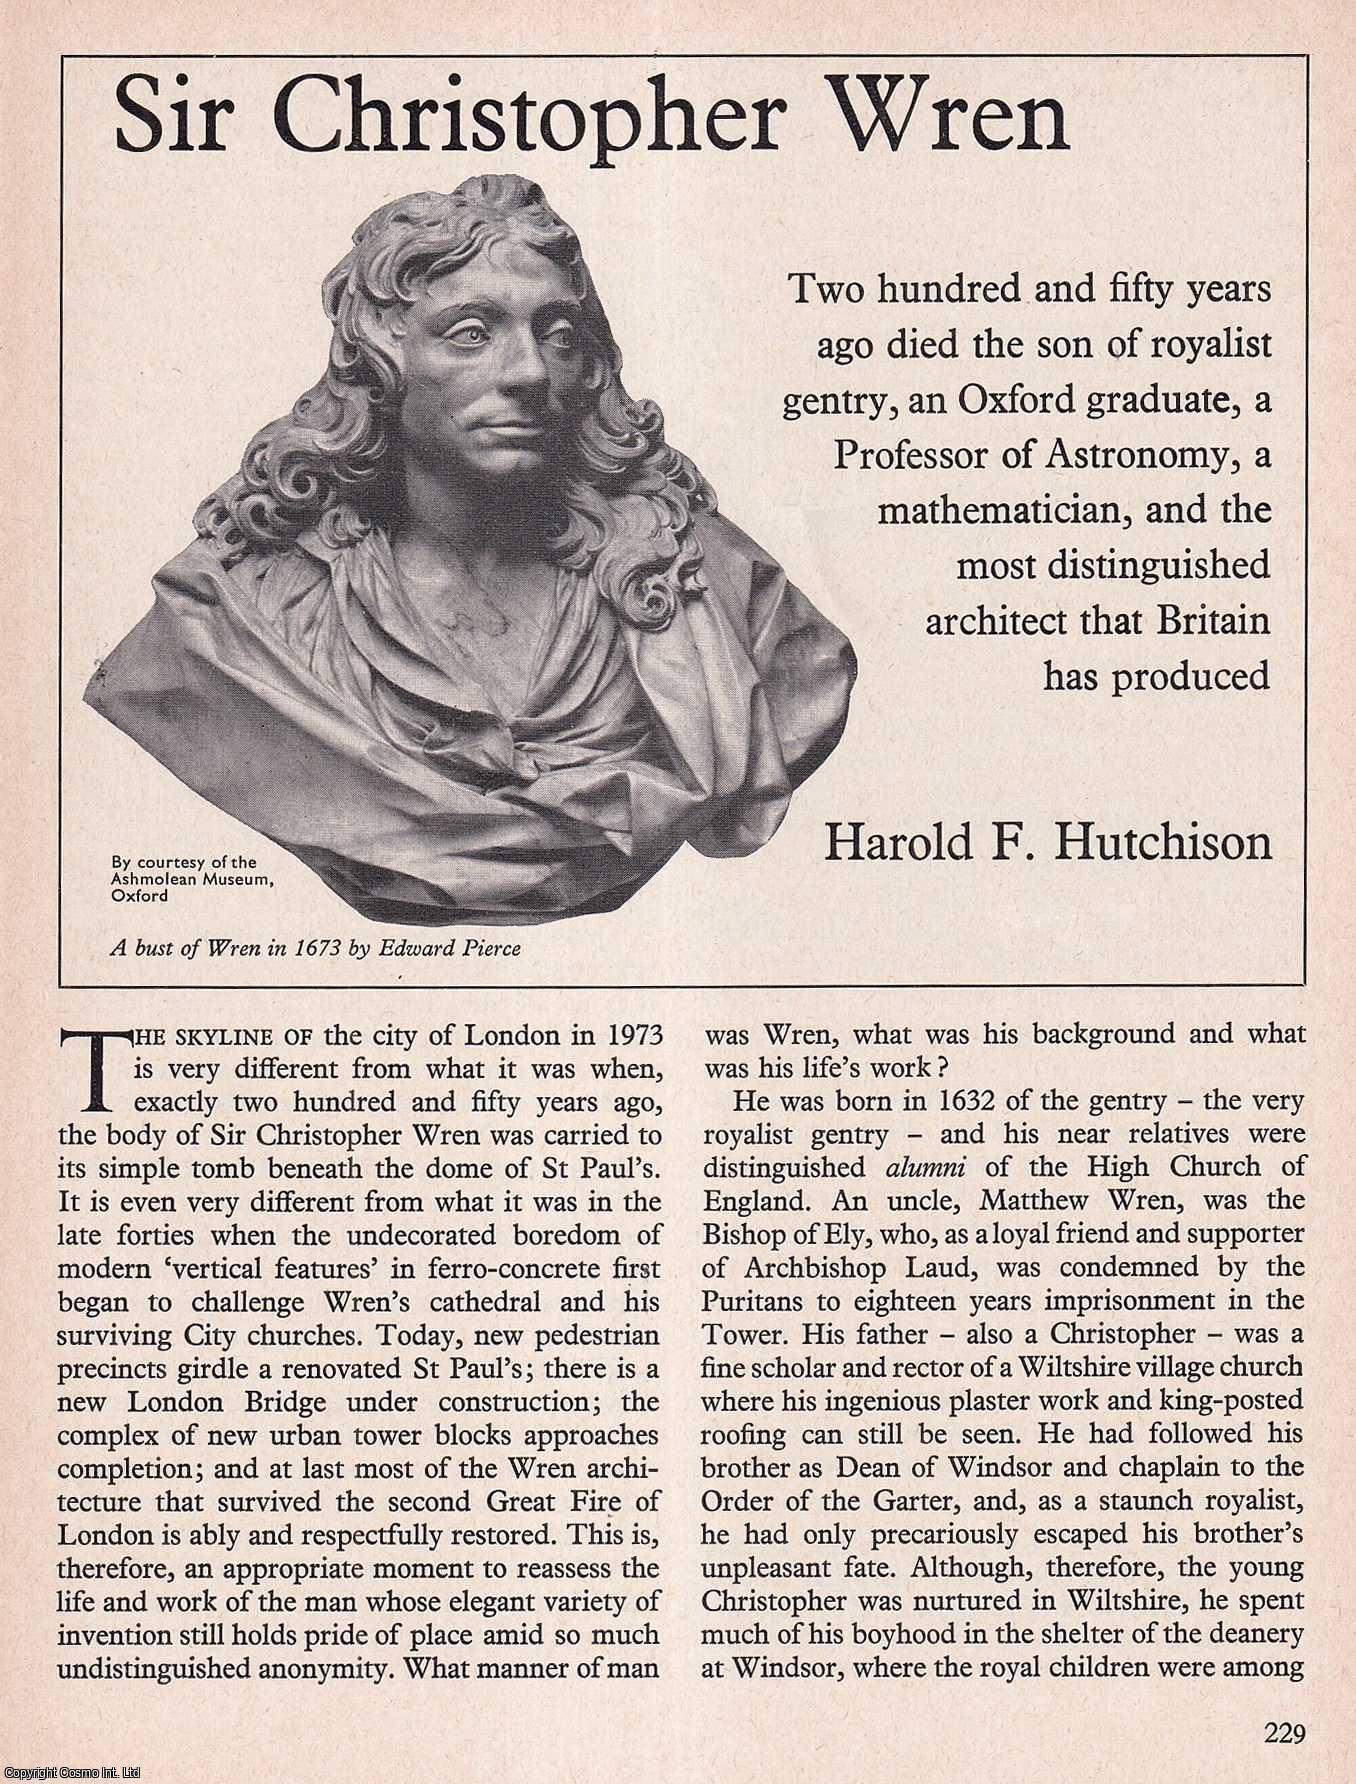 Harold F. Hutchison - Sir Christopher Wren. An original article from History Today magazine, 1973.